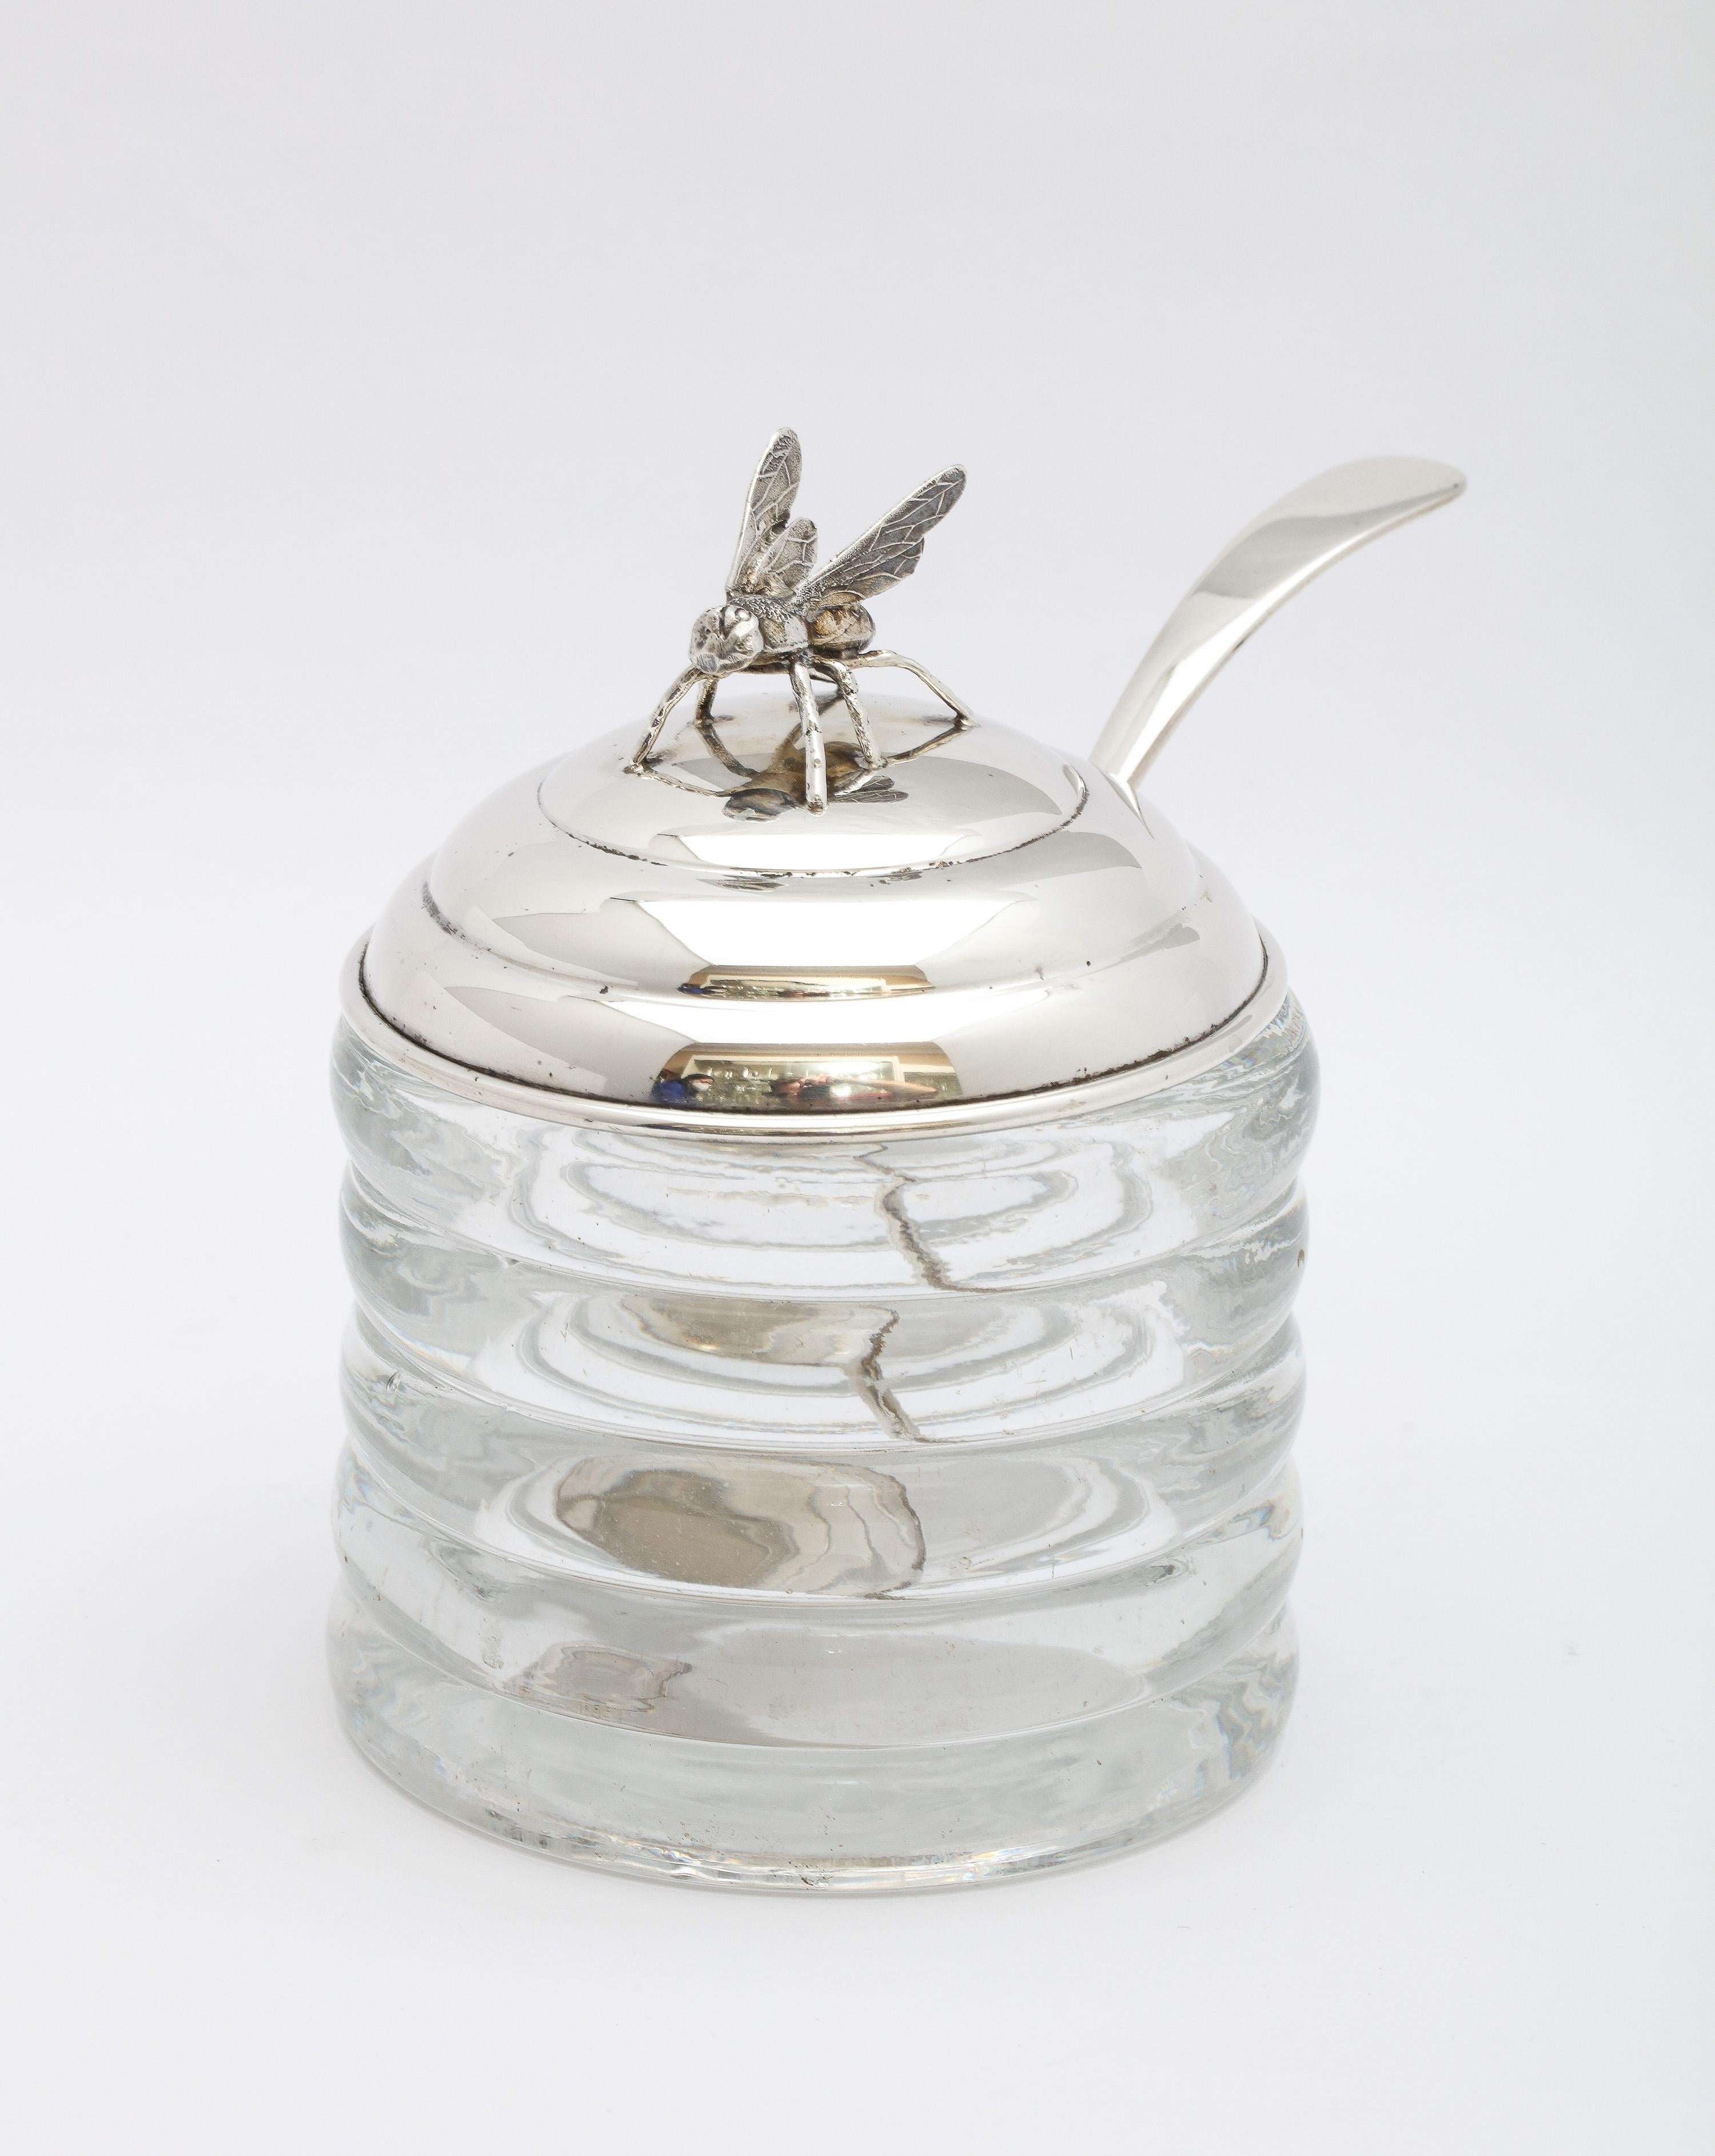 Art Deco Period Sterling Silver-Mounted Honey Jar with Original Honey Spoon 3